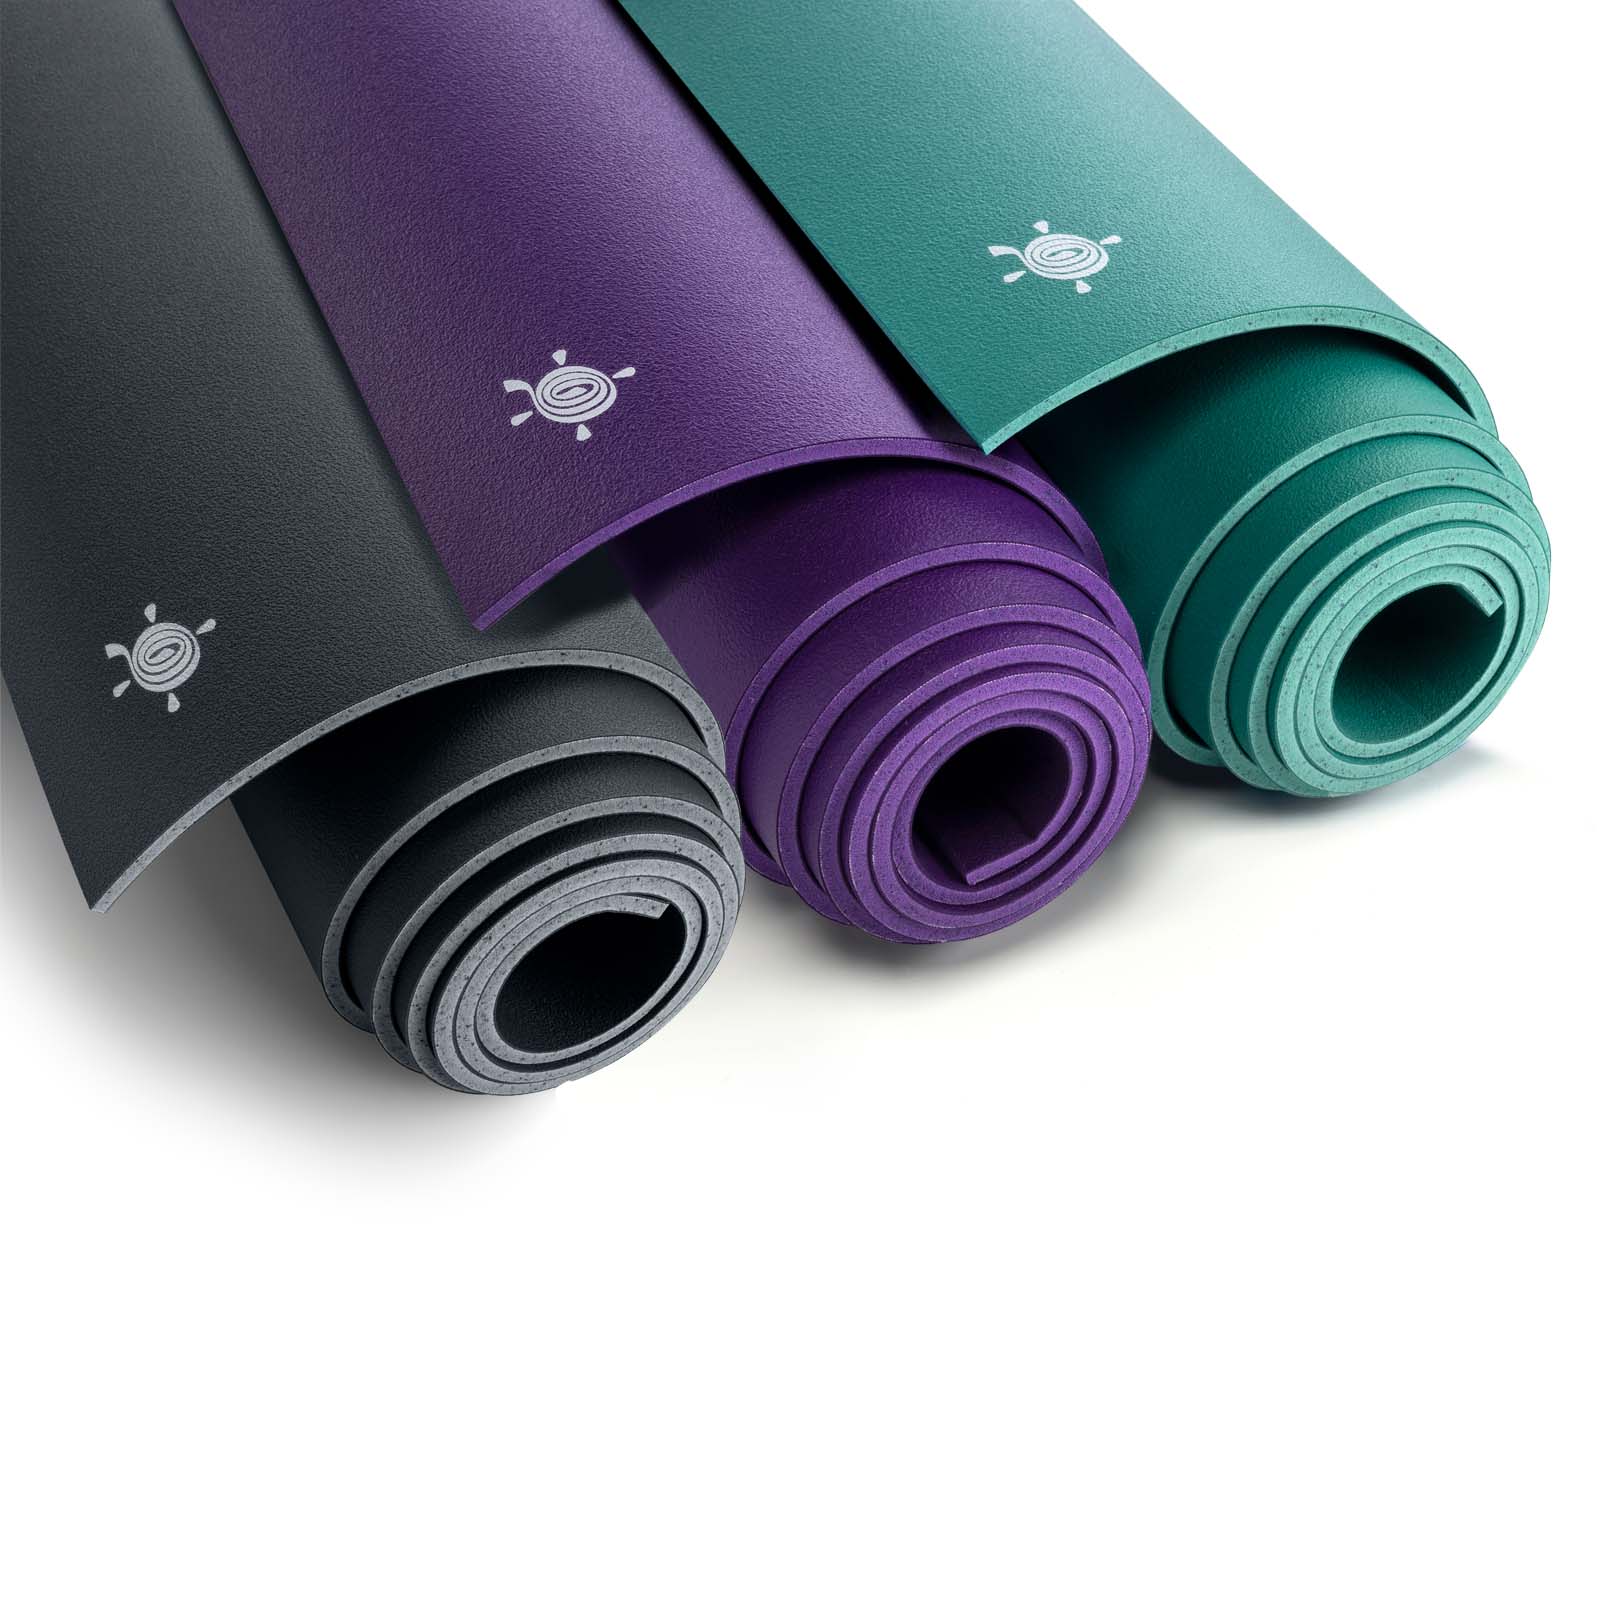 kurma yoga mats geco series group shot, with colors anthracite, bloom and lagoon